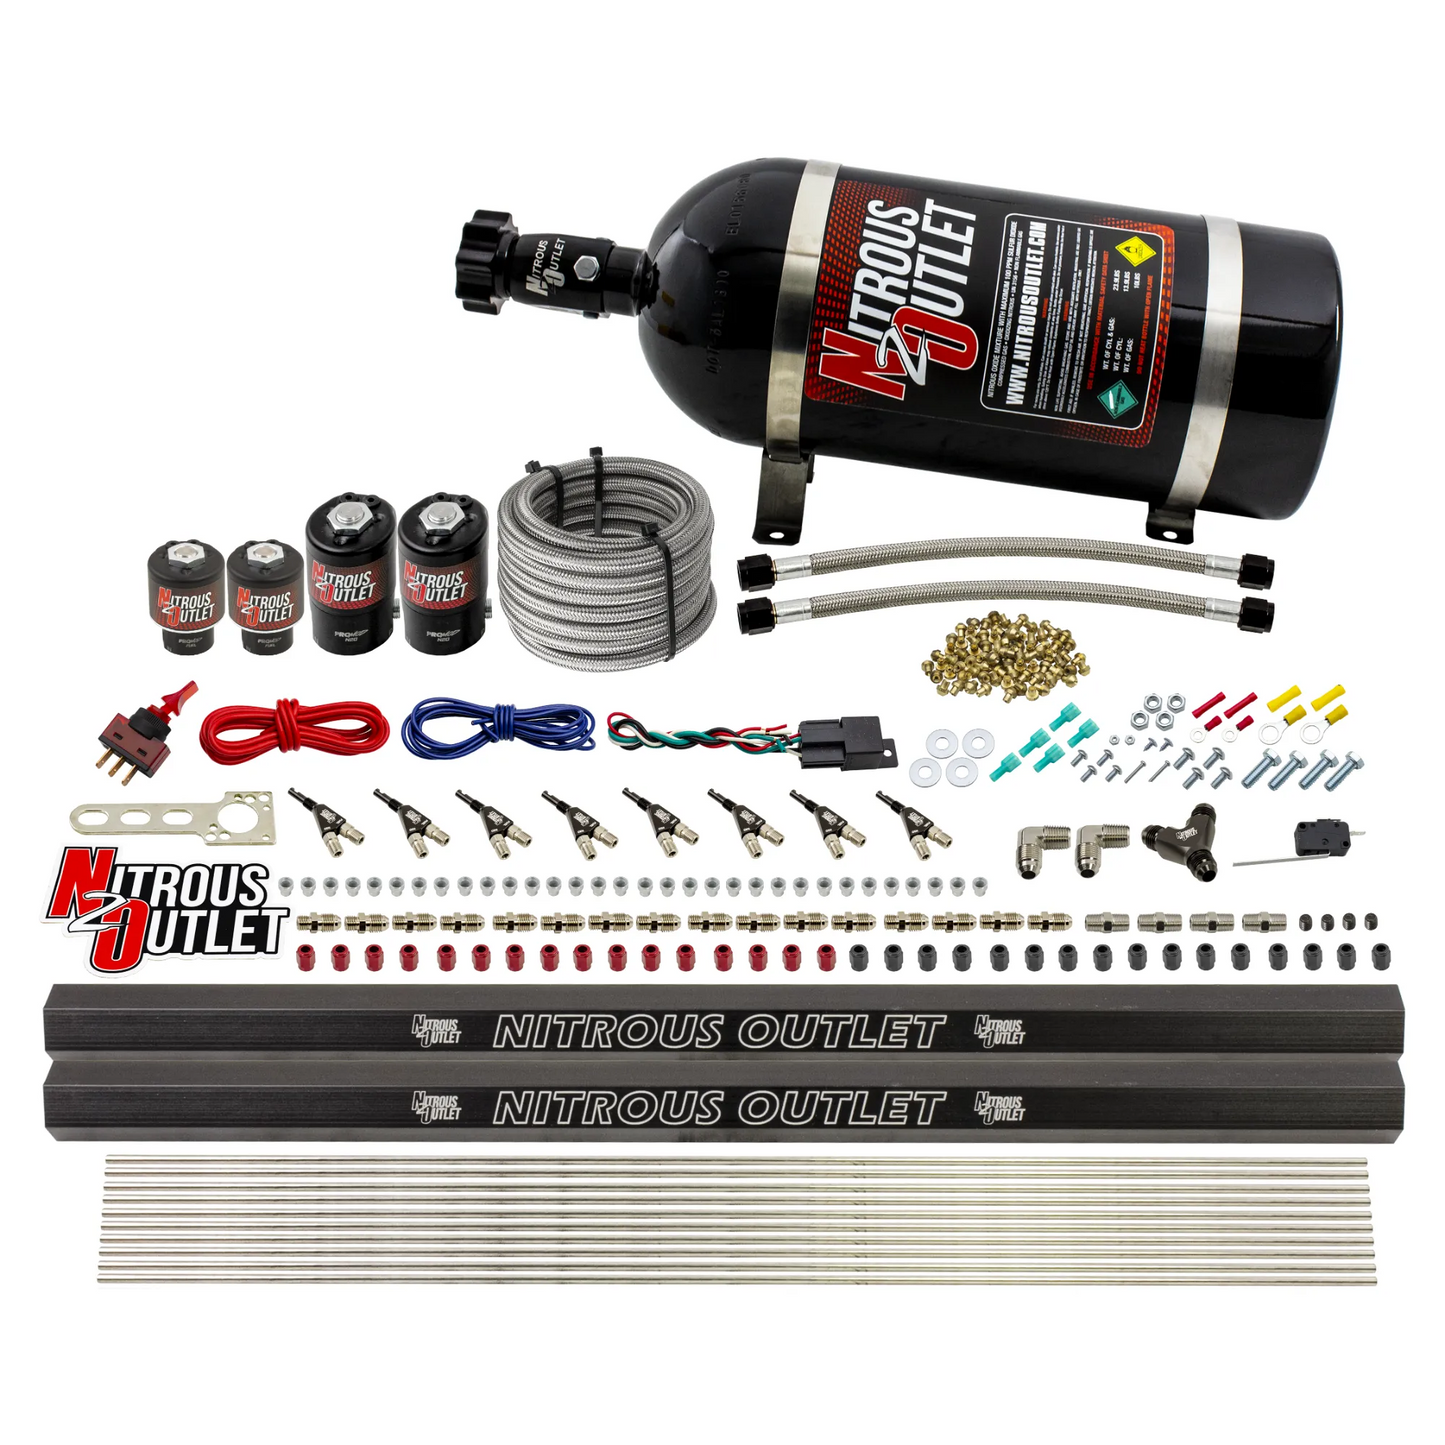 8 Cylinder Single Stage Direct Port Nitrous System with Injection Rails - E85 - .112 Nitrous/.177 Fuel - 45-55 PSI